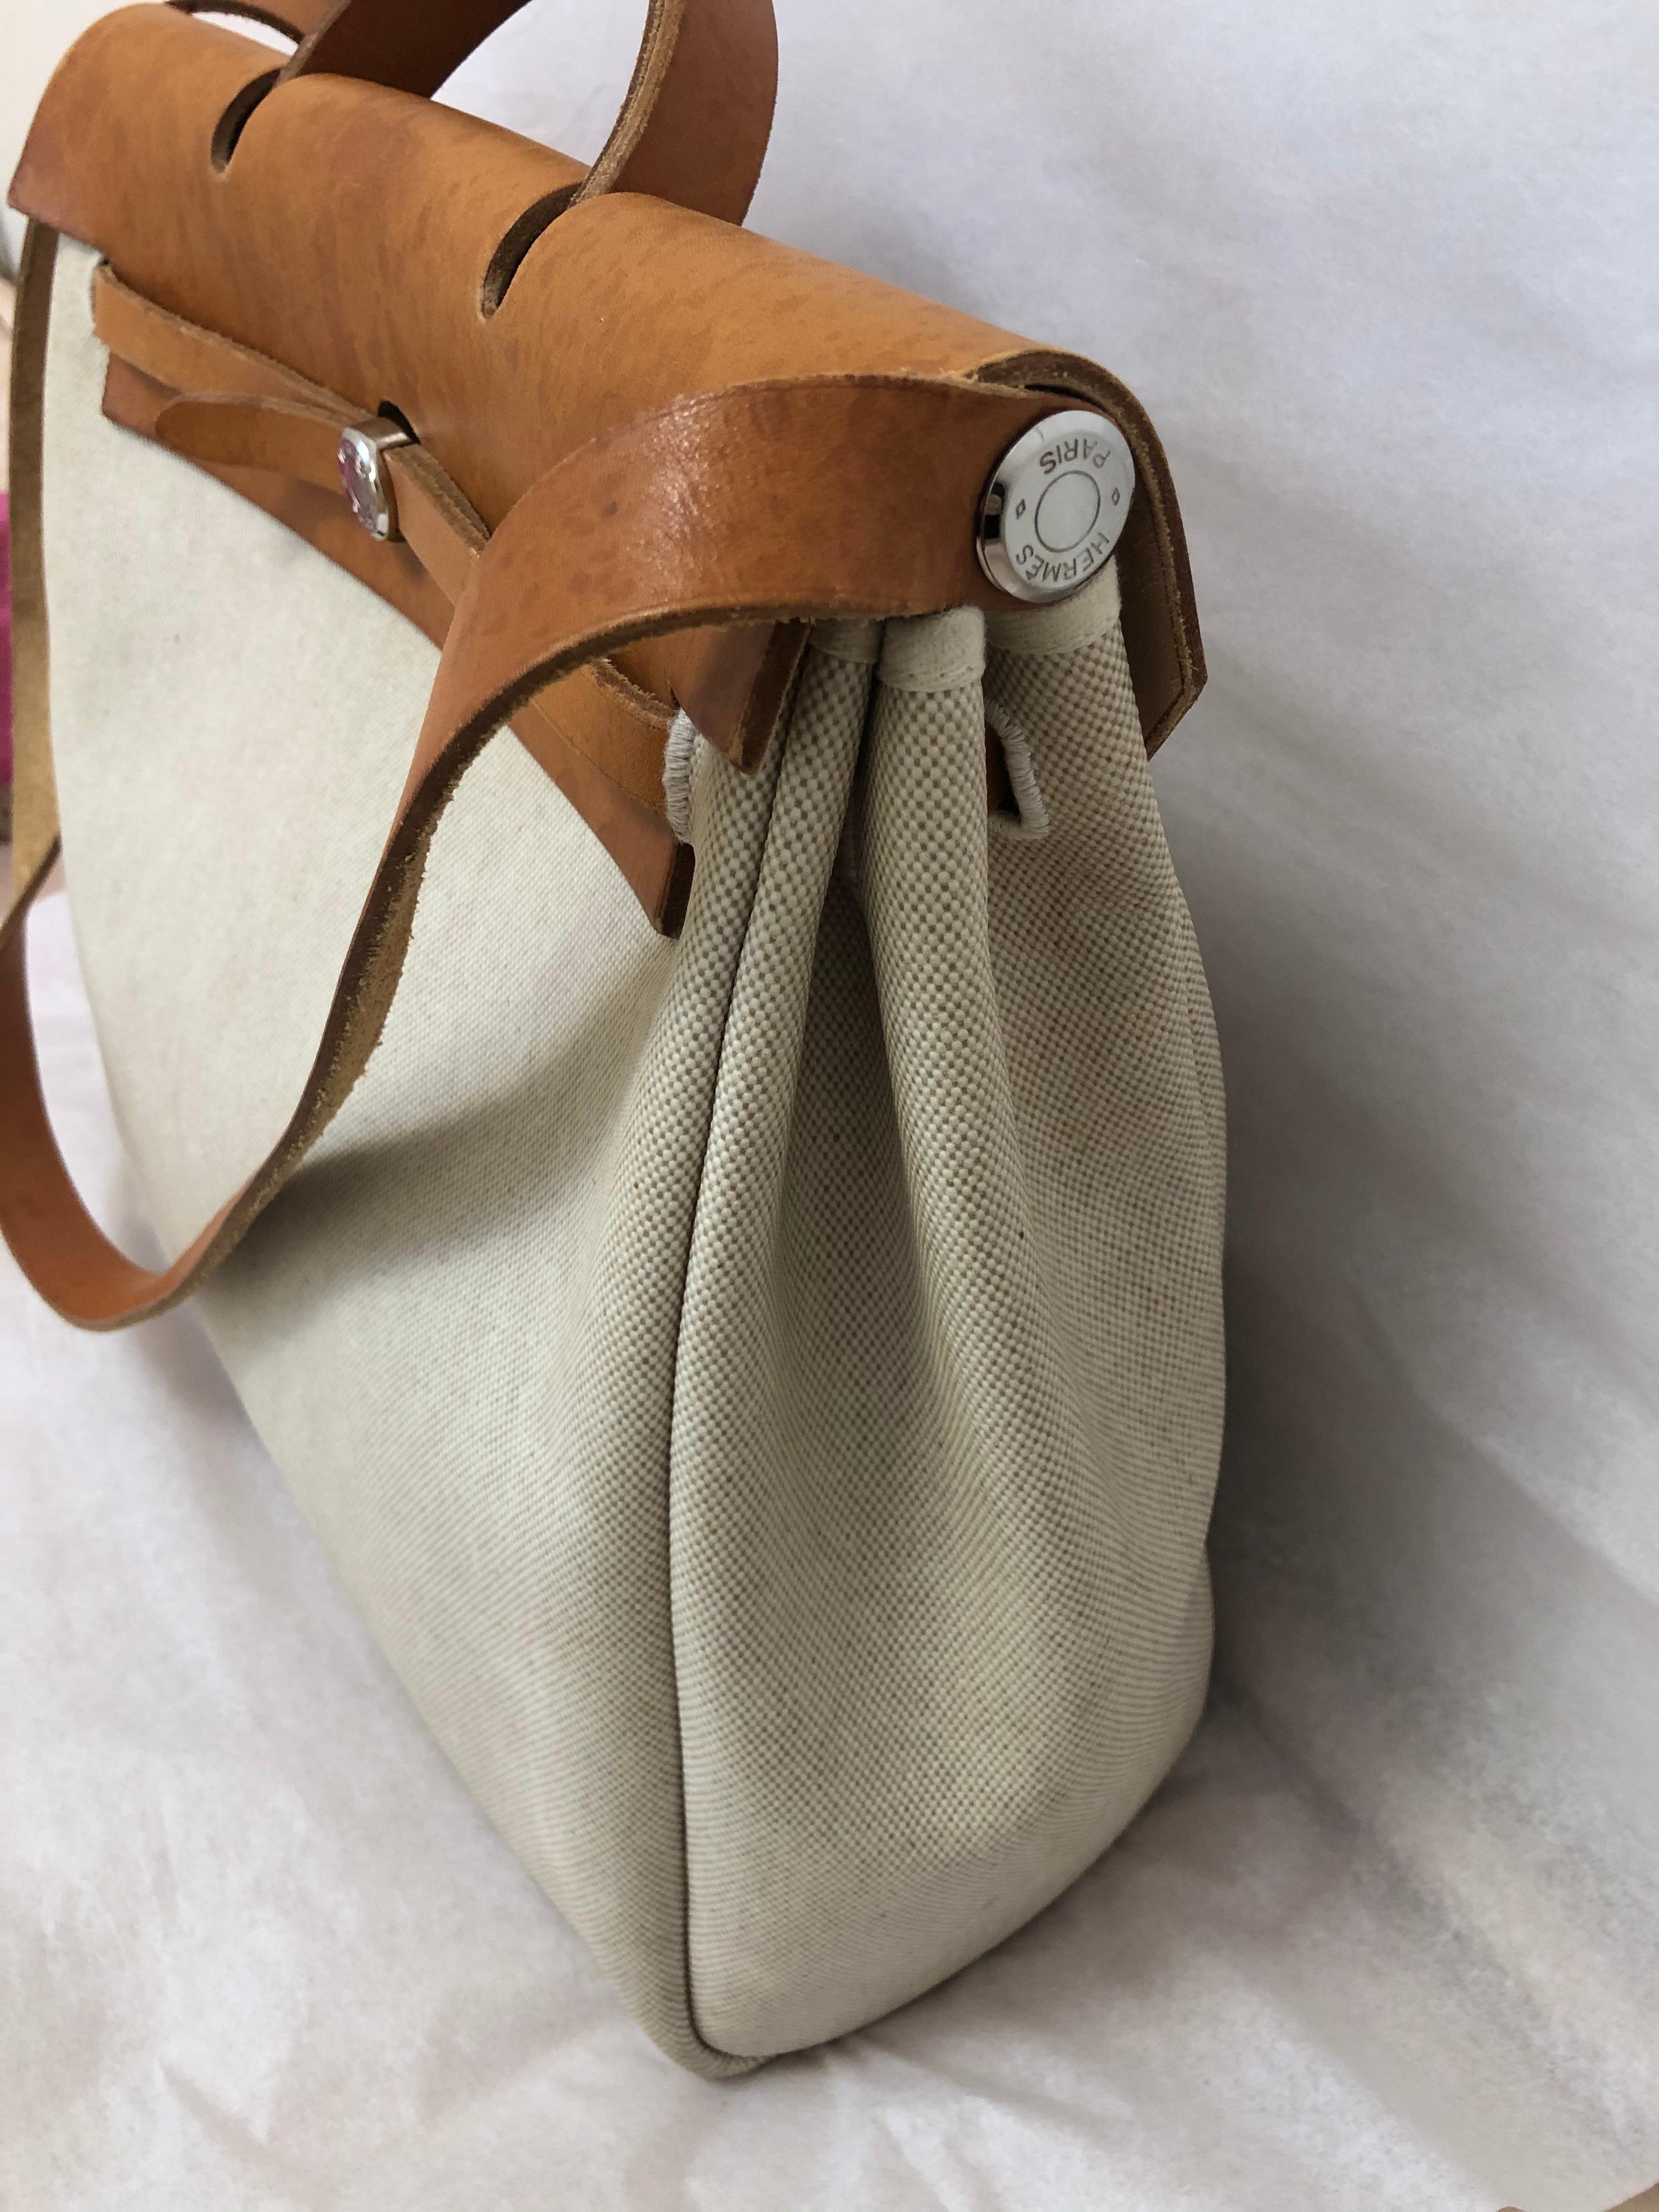 This 1998 canvas and leather large Herbag has silver hardware, lock and key, and come with the canvas protector/storage container. The bag can be carried as a handbag or crossbody, and is large enough to double up as a weekender.
It is in good